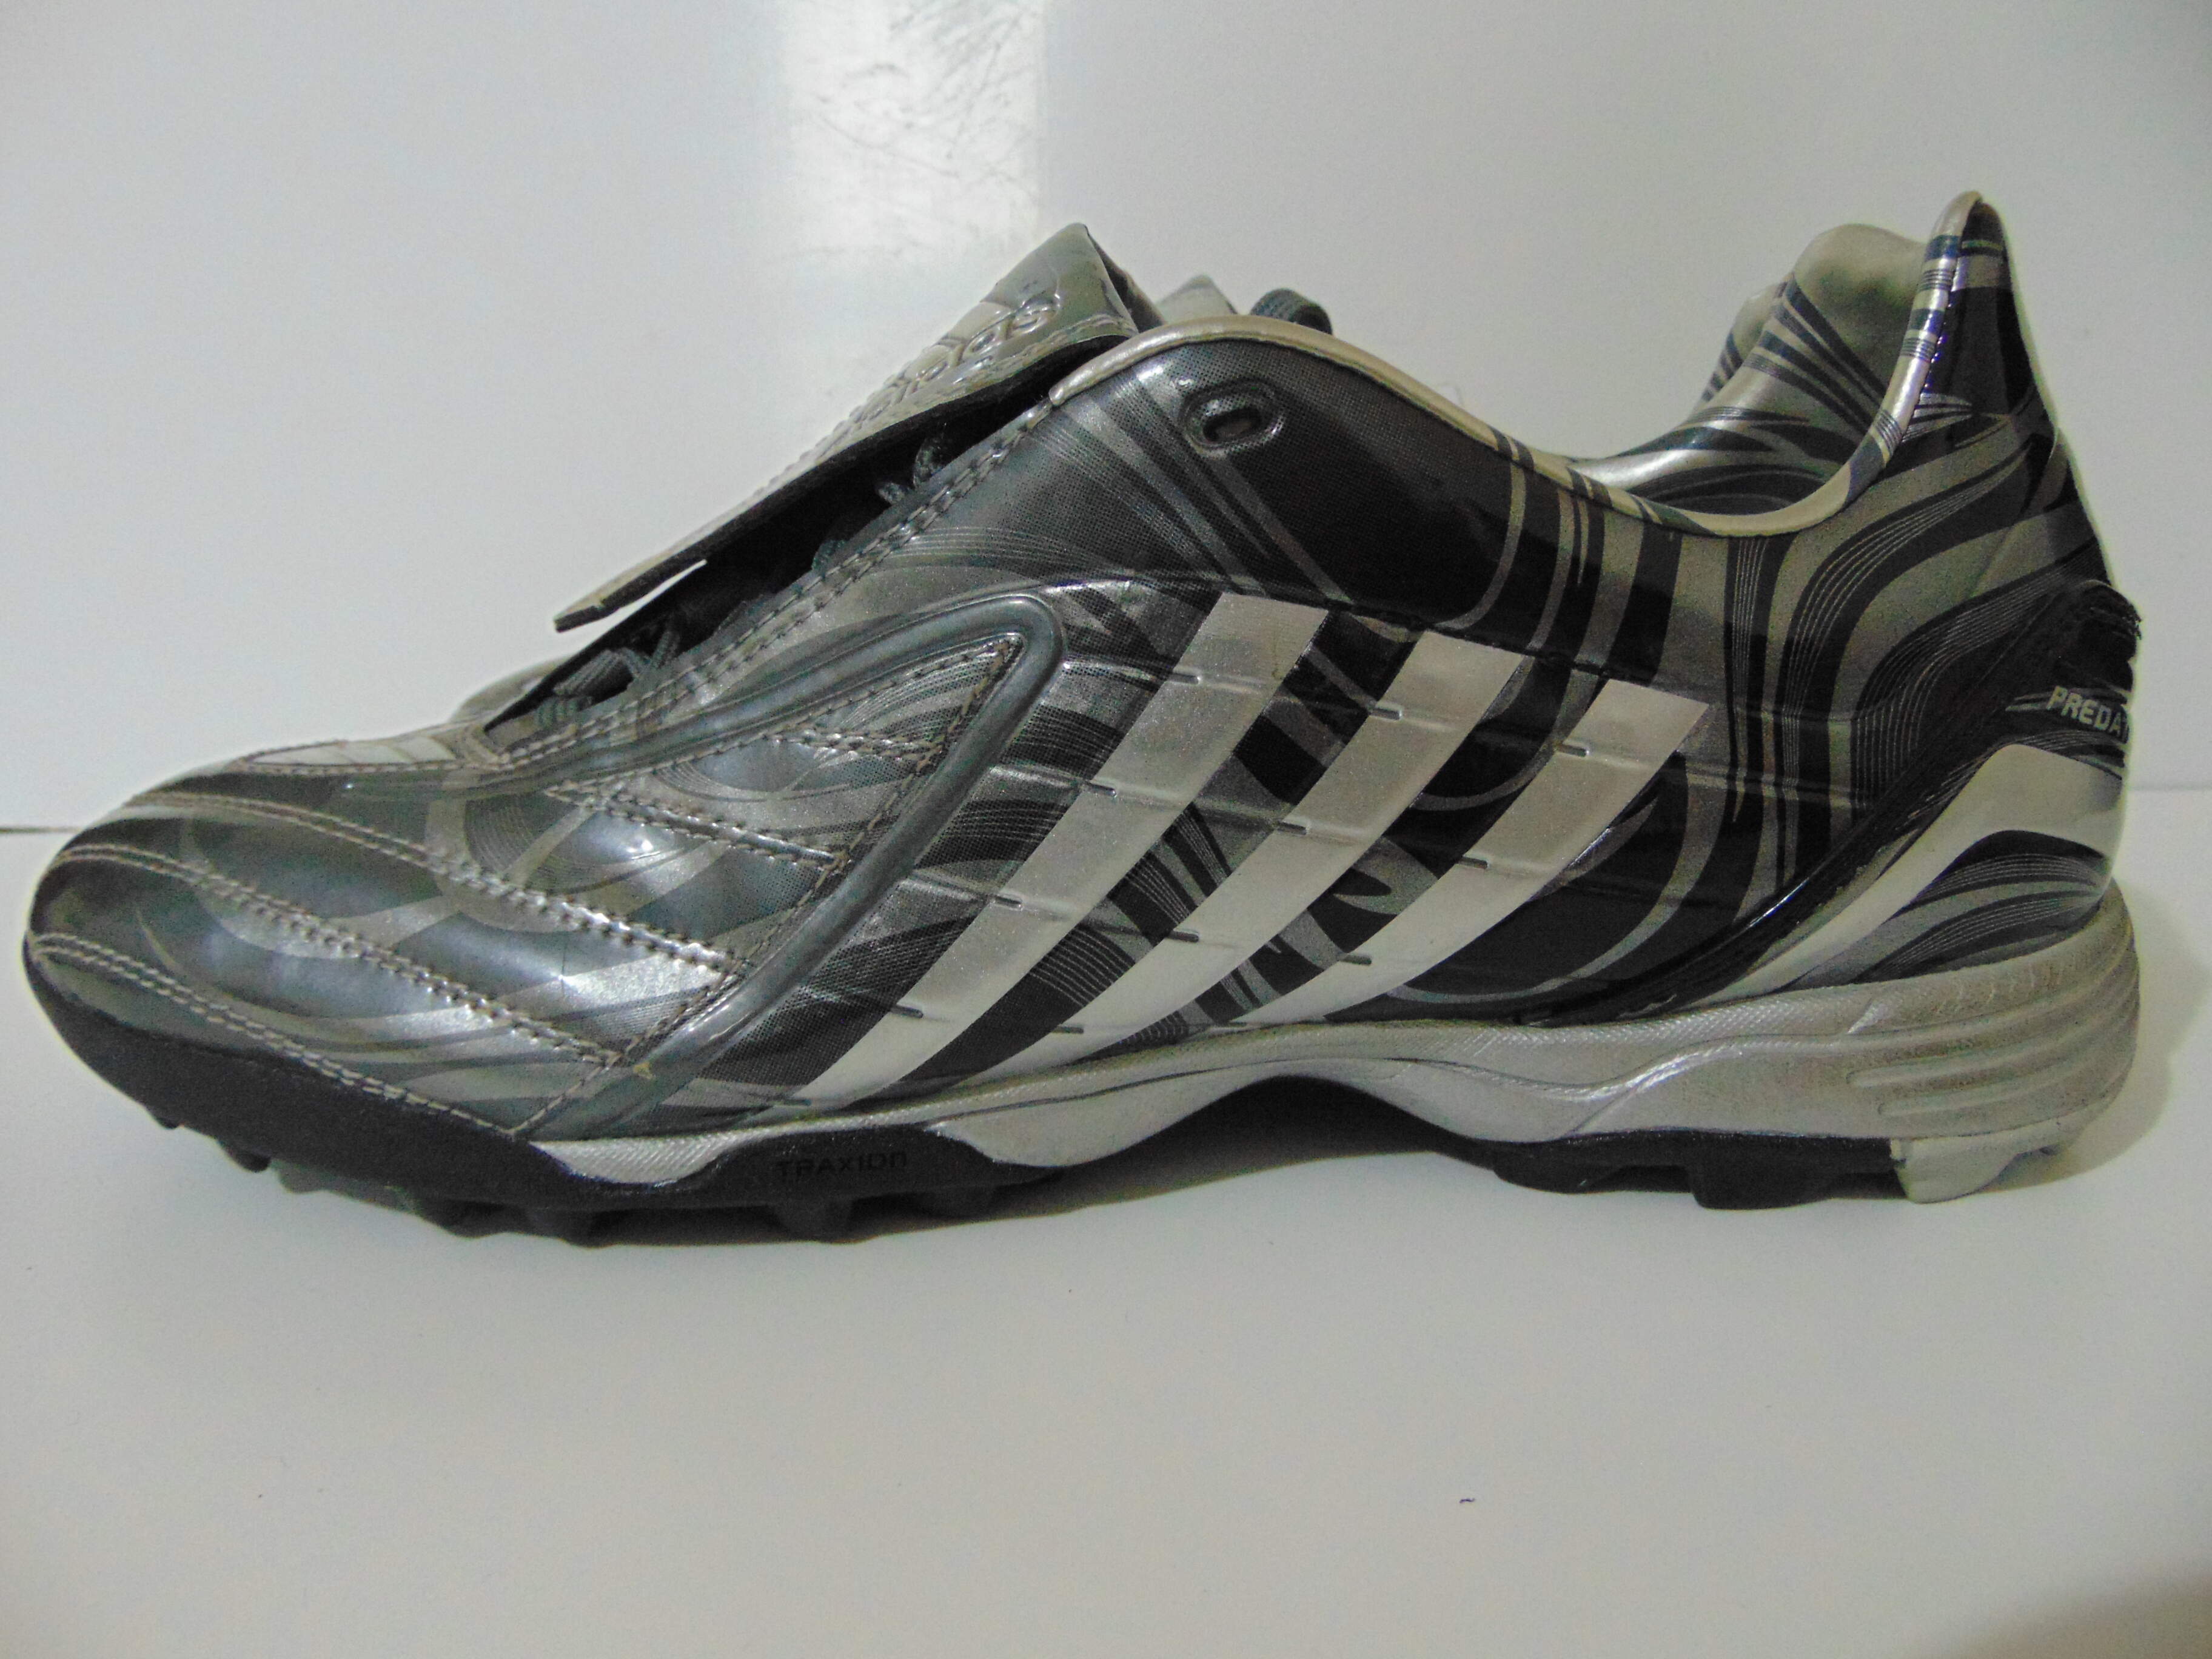 Adidas Absolado PS TRX TF  Football Boots EX Shop UK6.5 Eur 40 Only £24.99